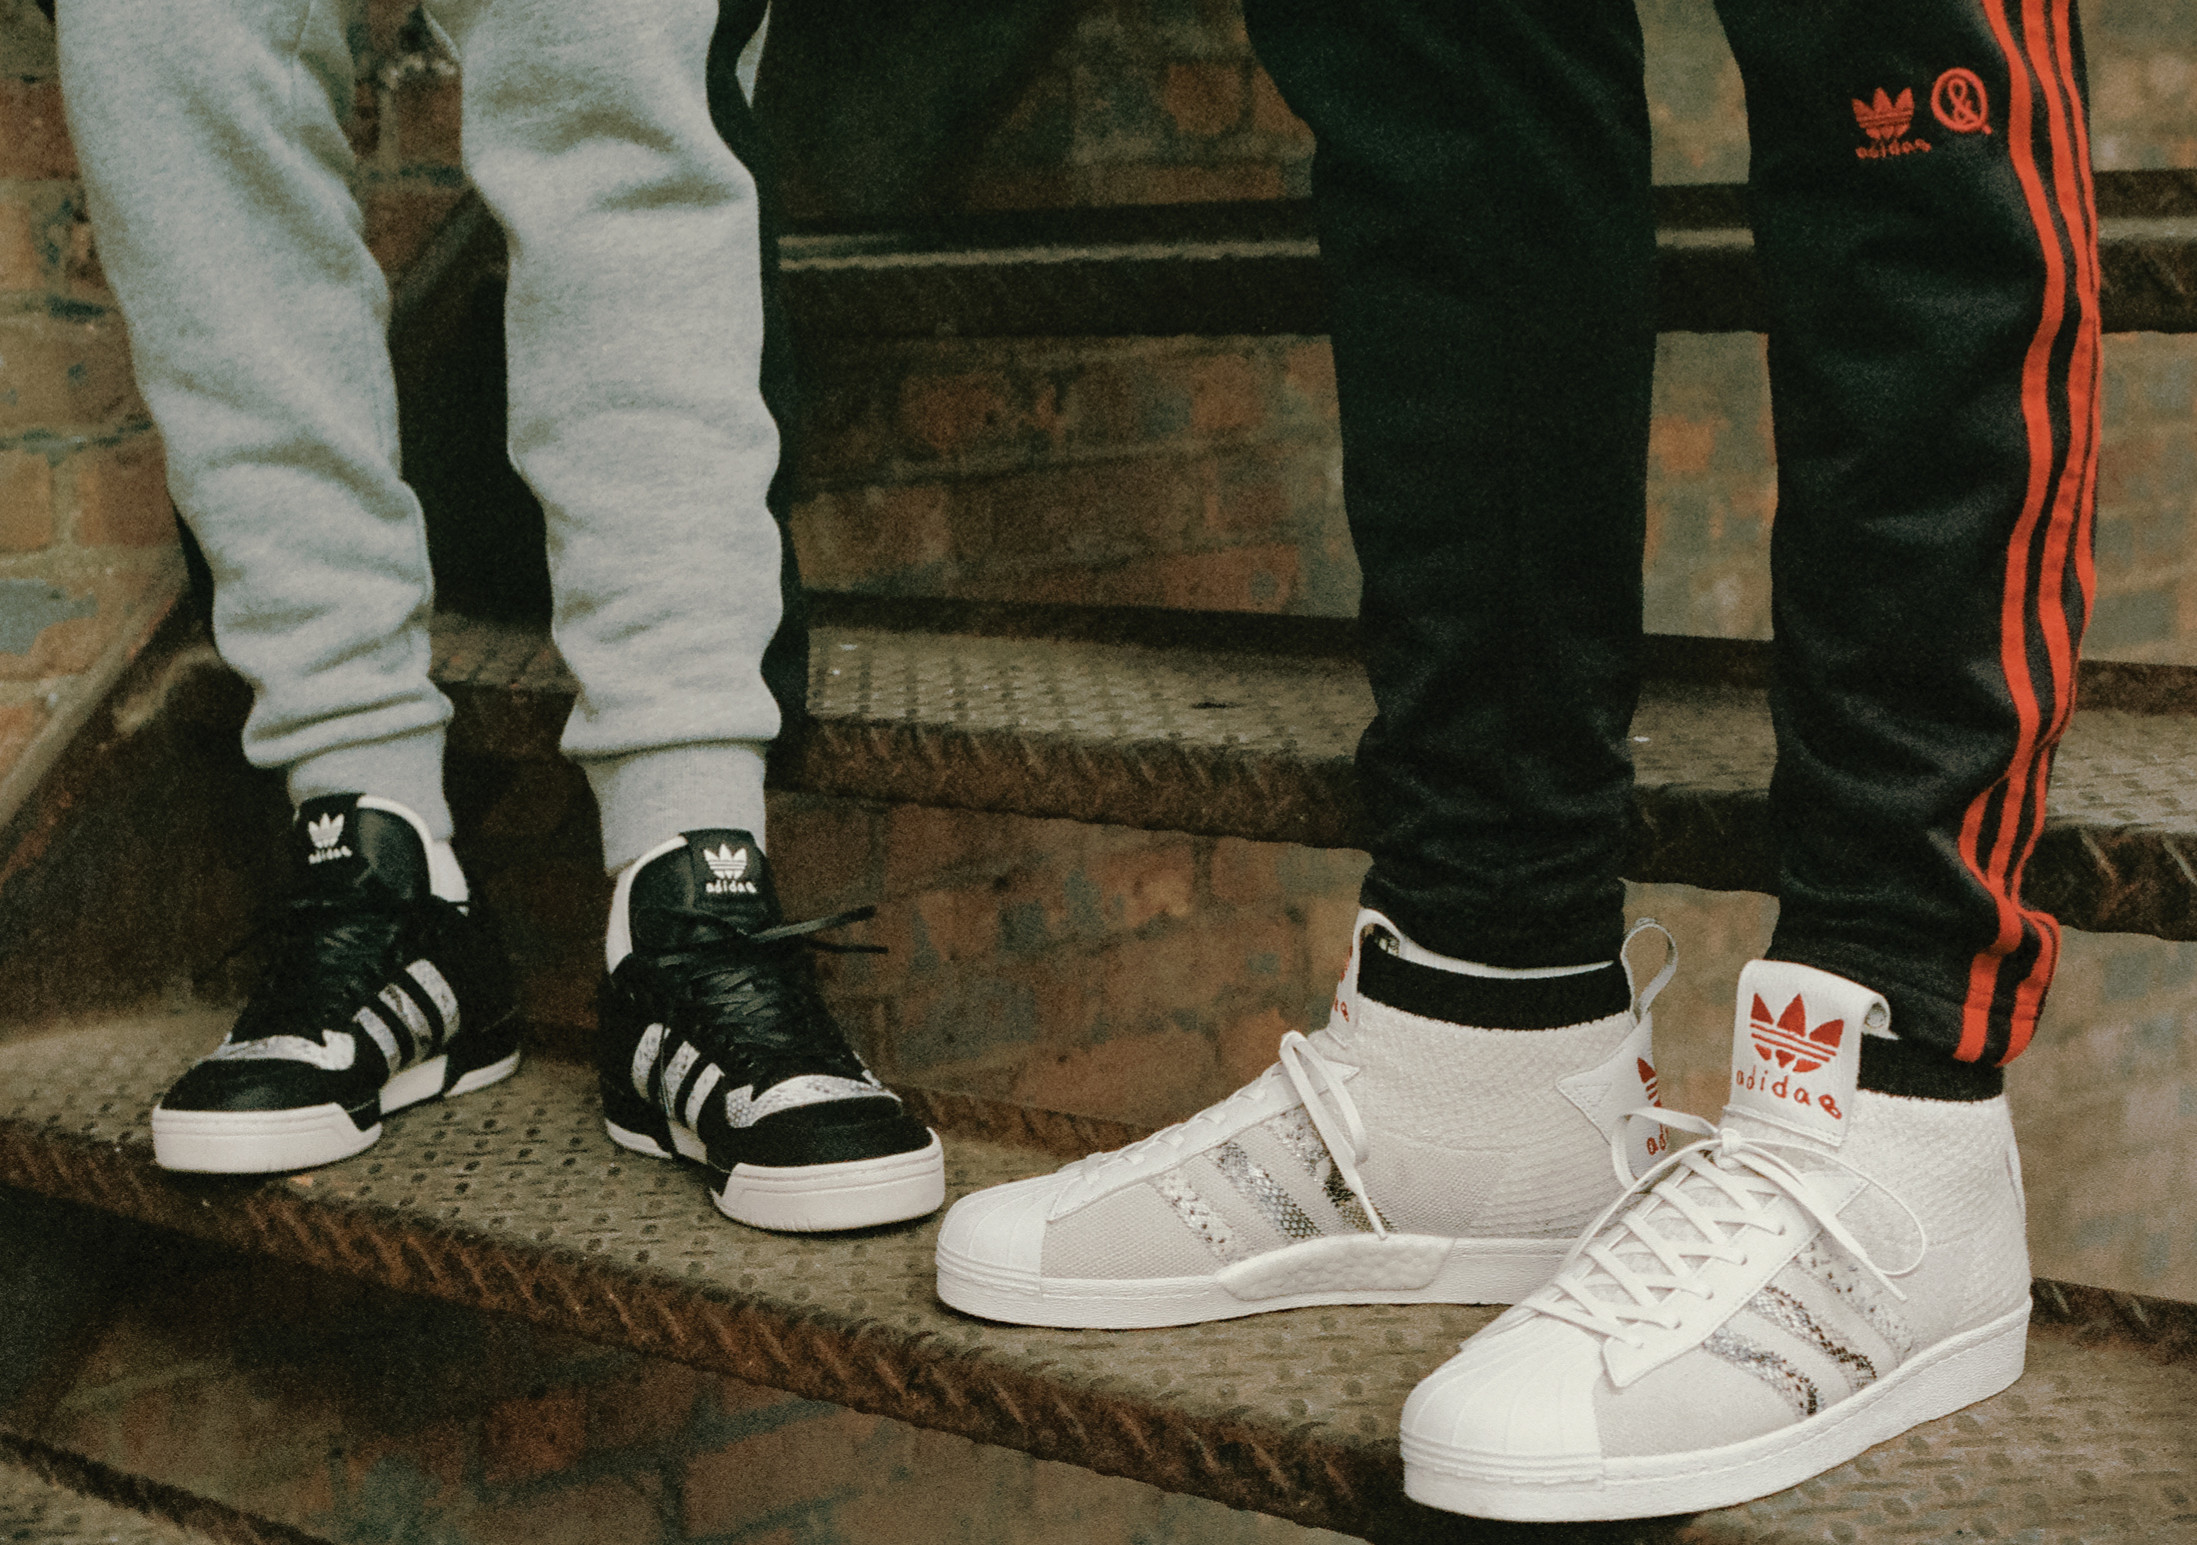 Adidas x United Arrows and Sons Collection